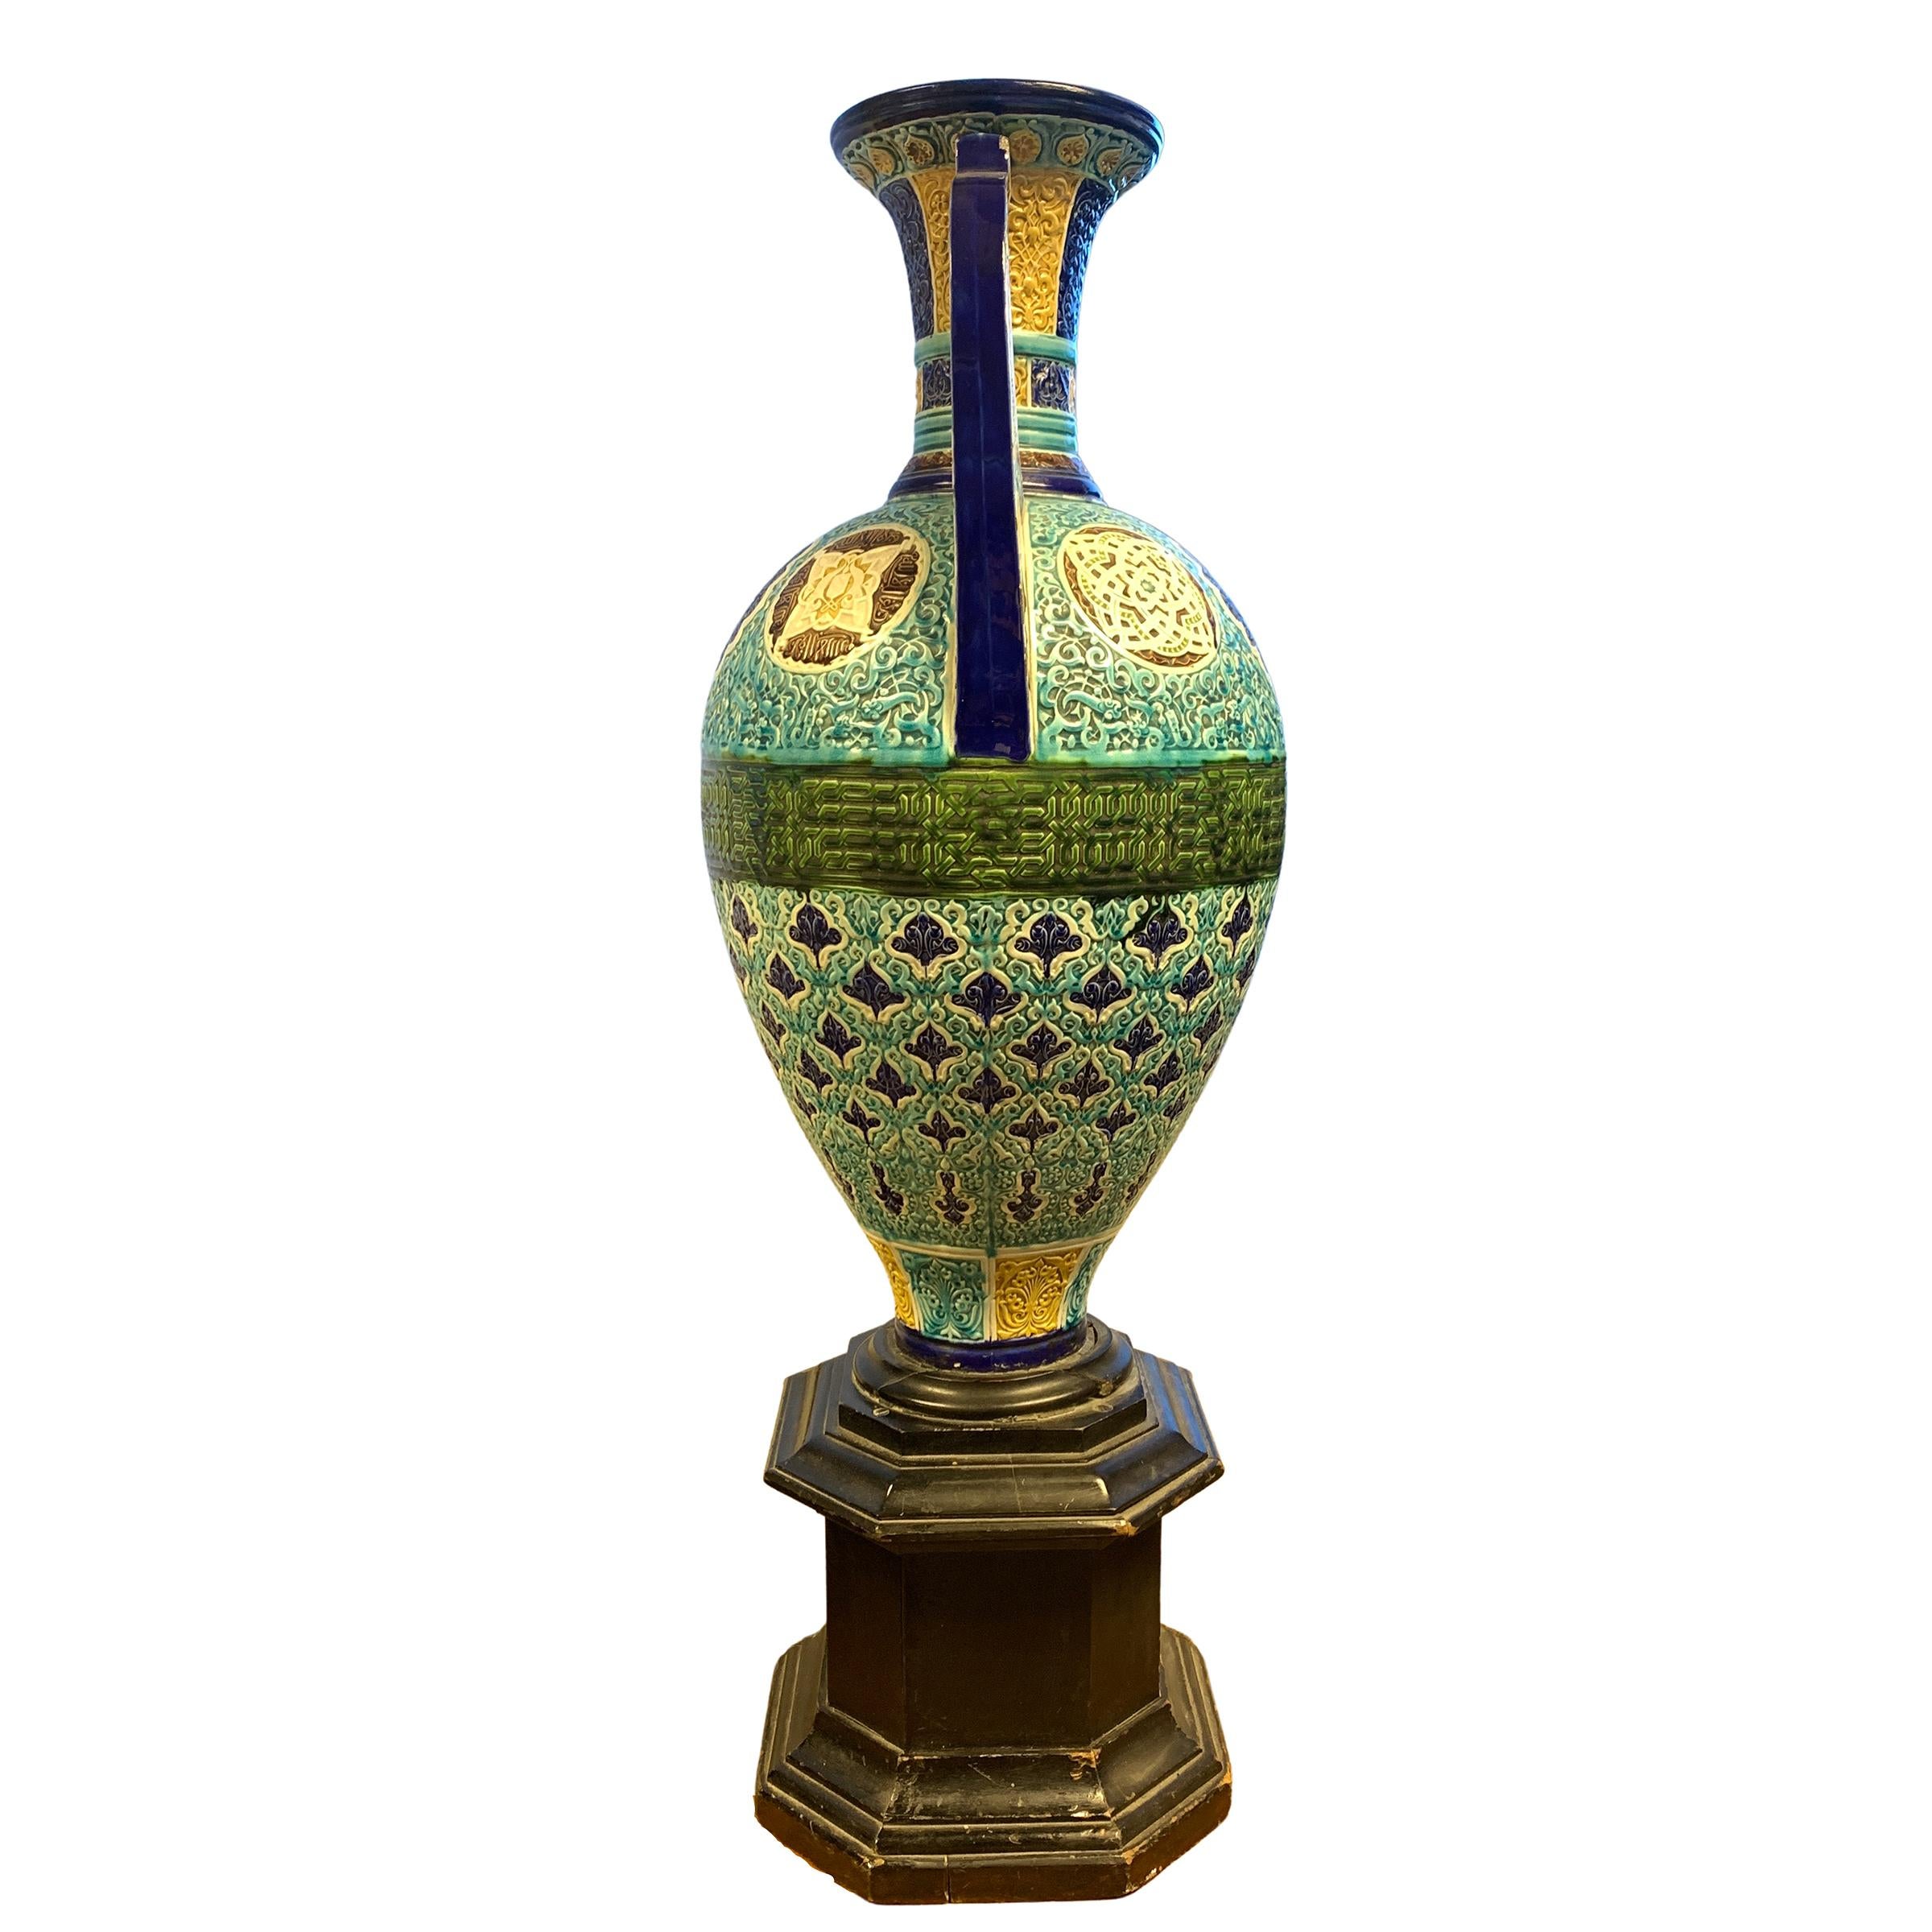 Exquisite quality Alhambra style vase in turquoise, yellow, green and blue with engraving and calligraphy all around the vase. 
  